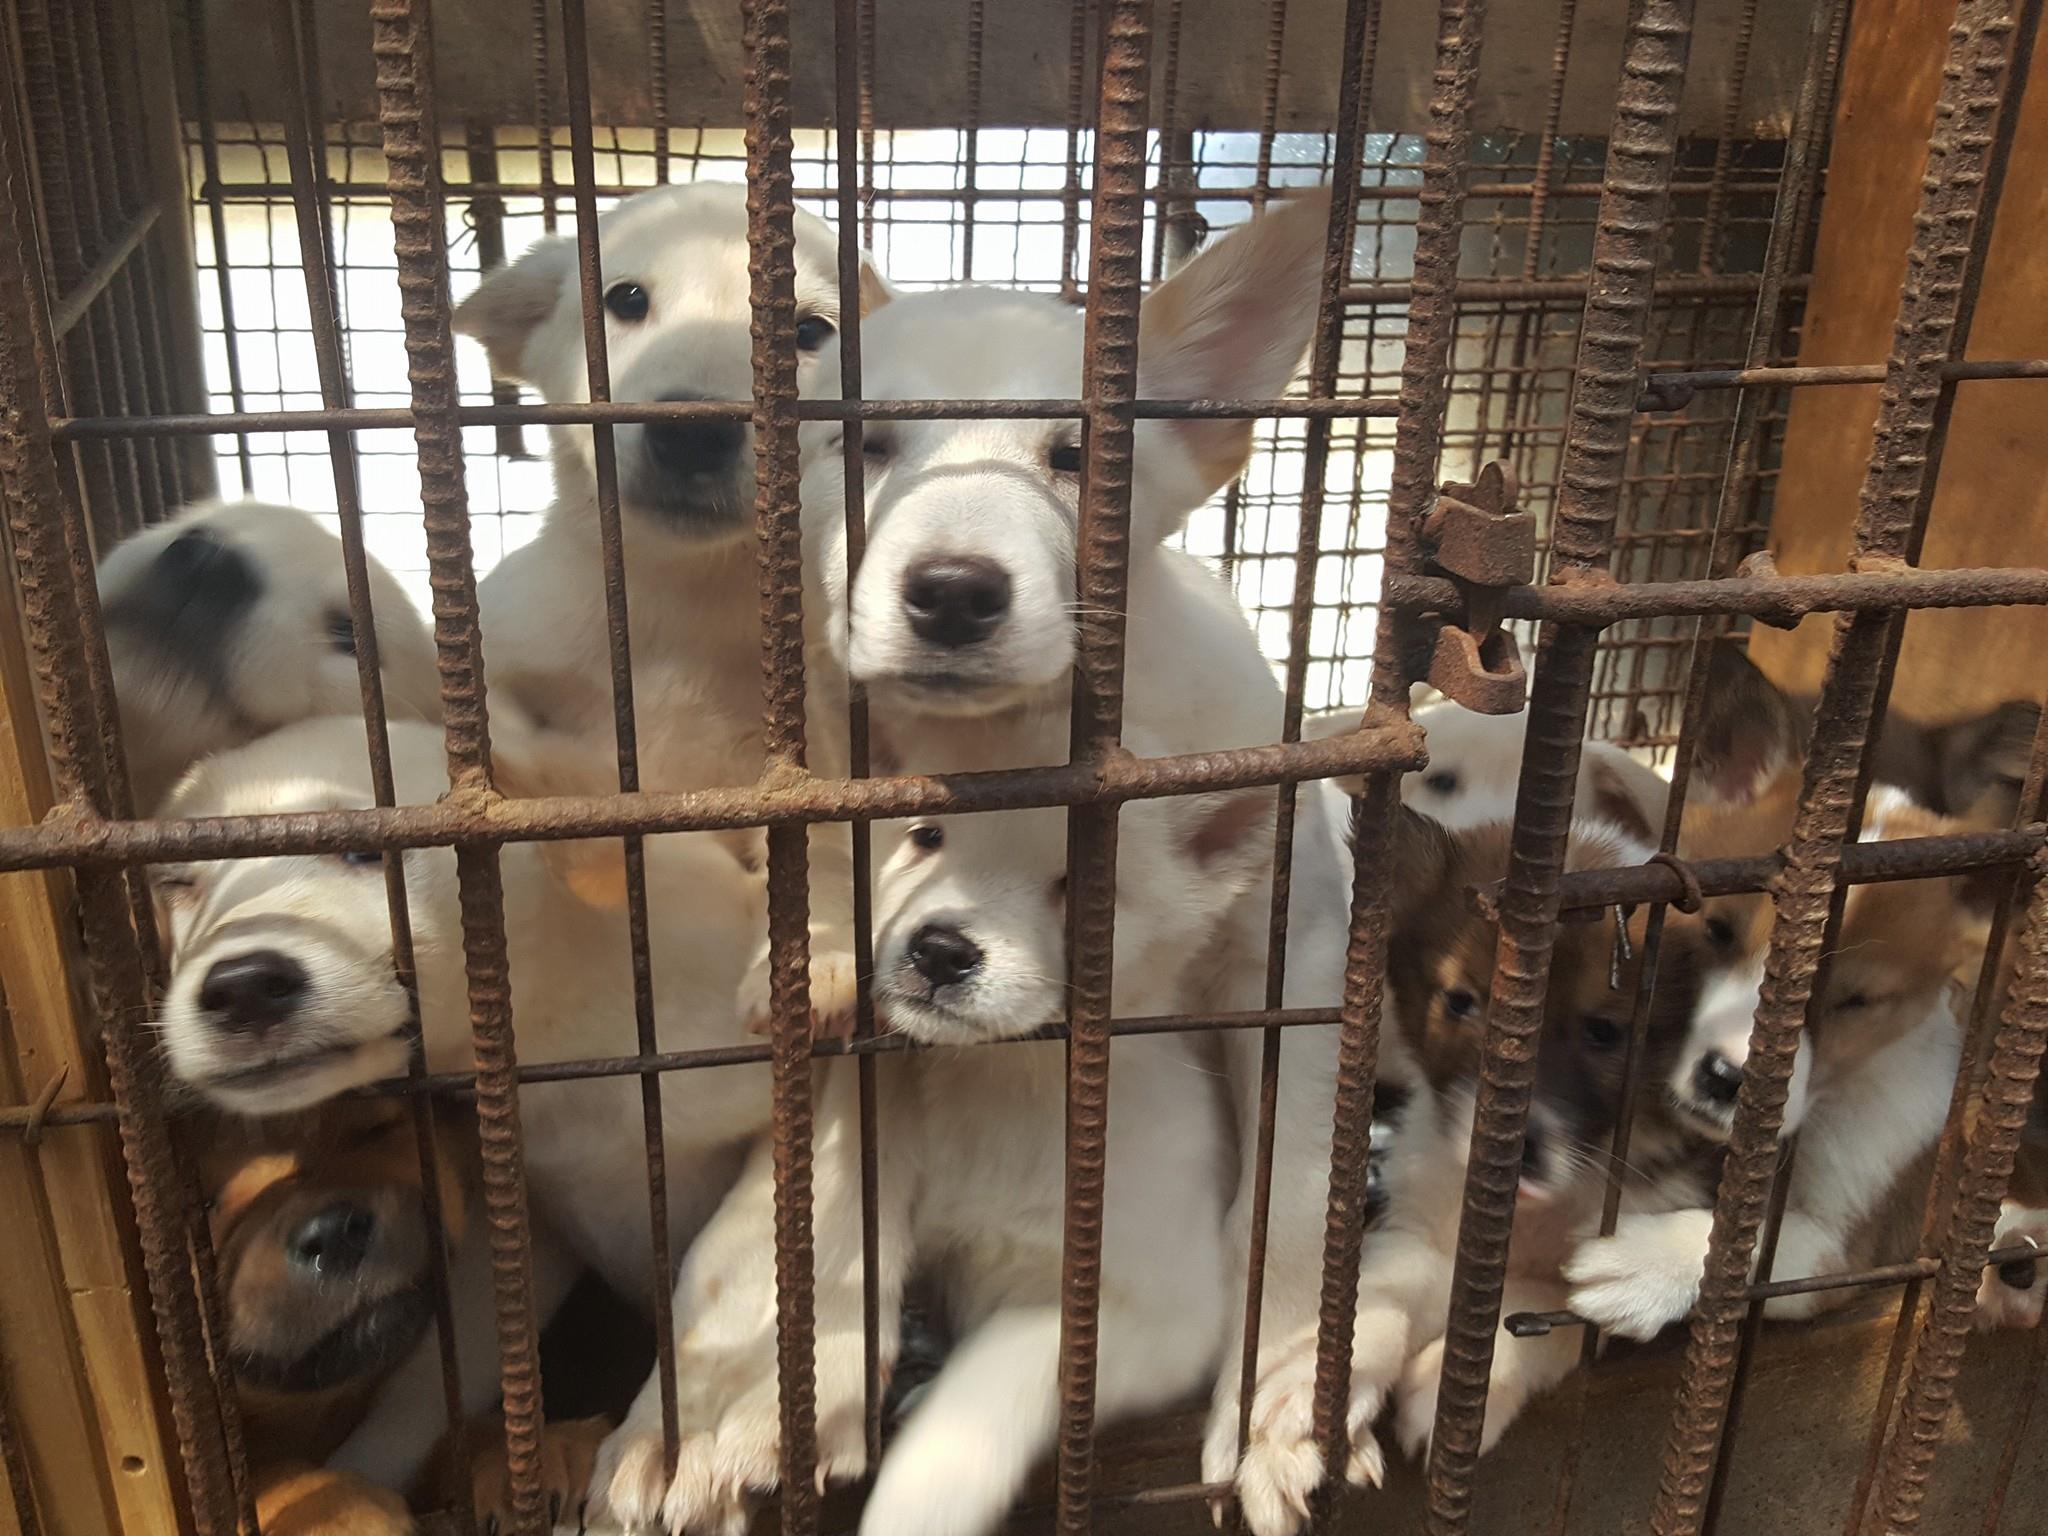 Bucheon Mayor Kim is visiting Sister City Bakersfield – time to urge the ending of the dog meat cruelty